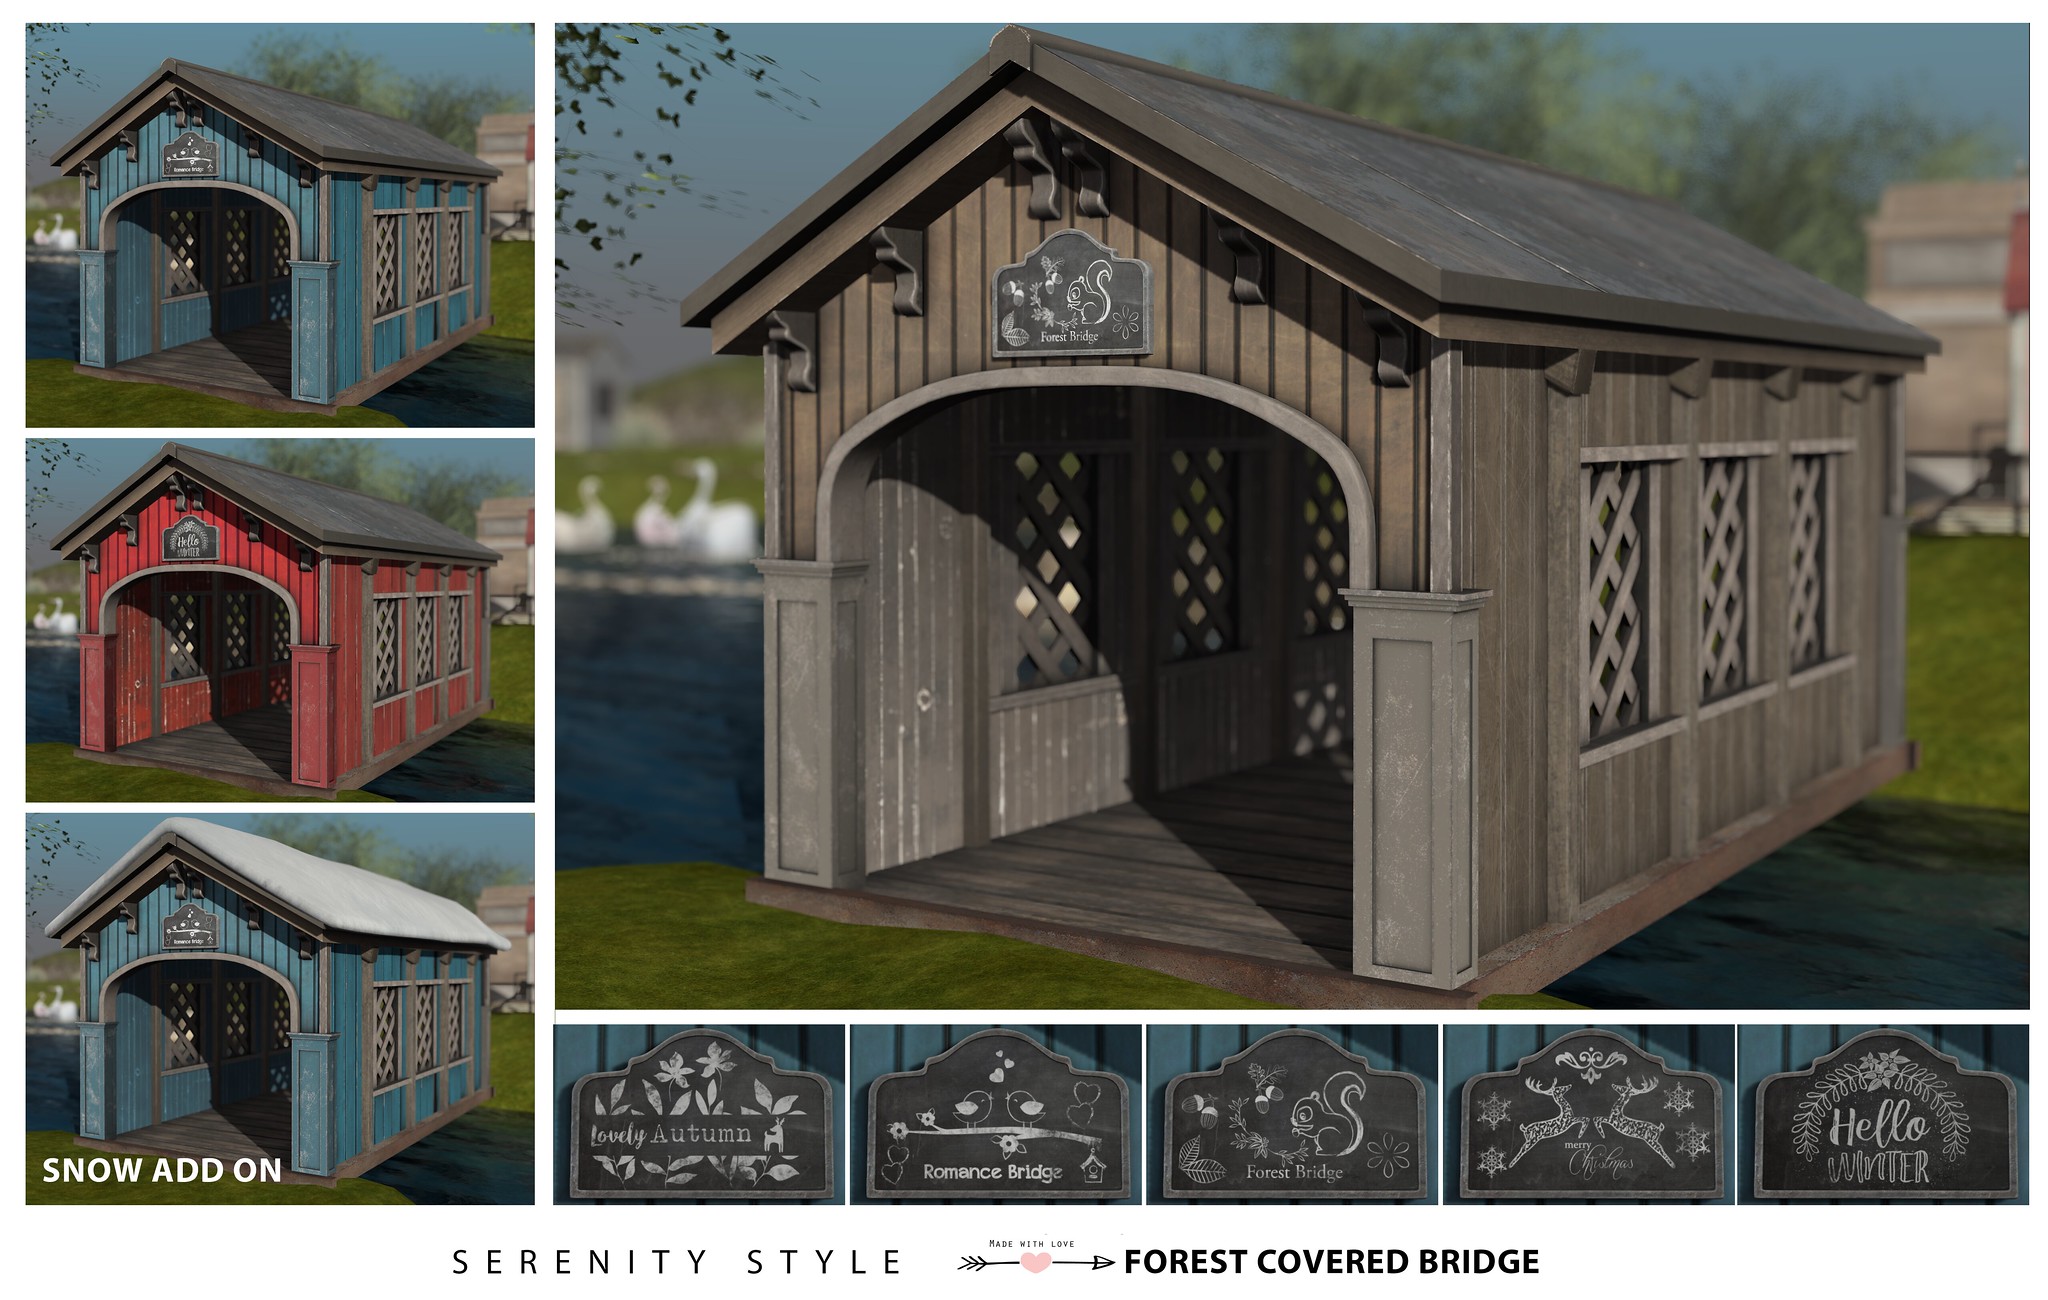 Serenity Style – Forest Covered Bridge